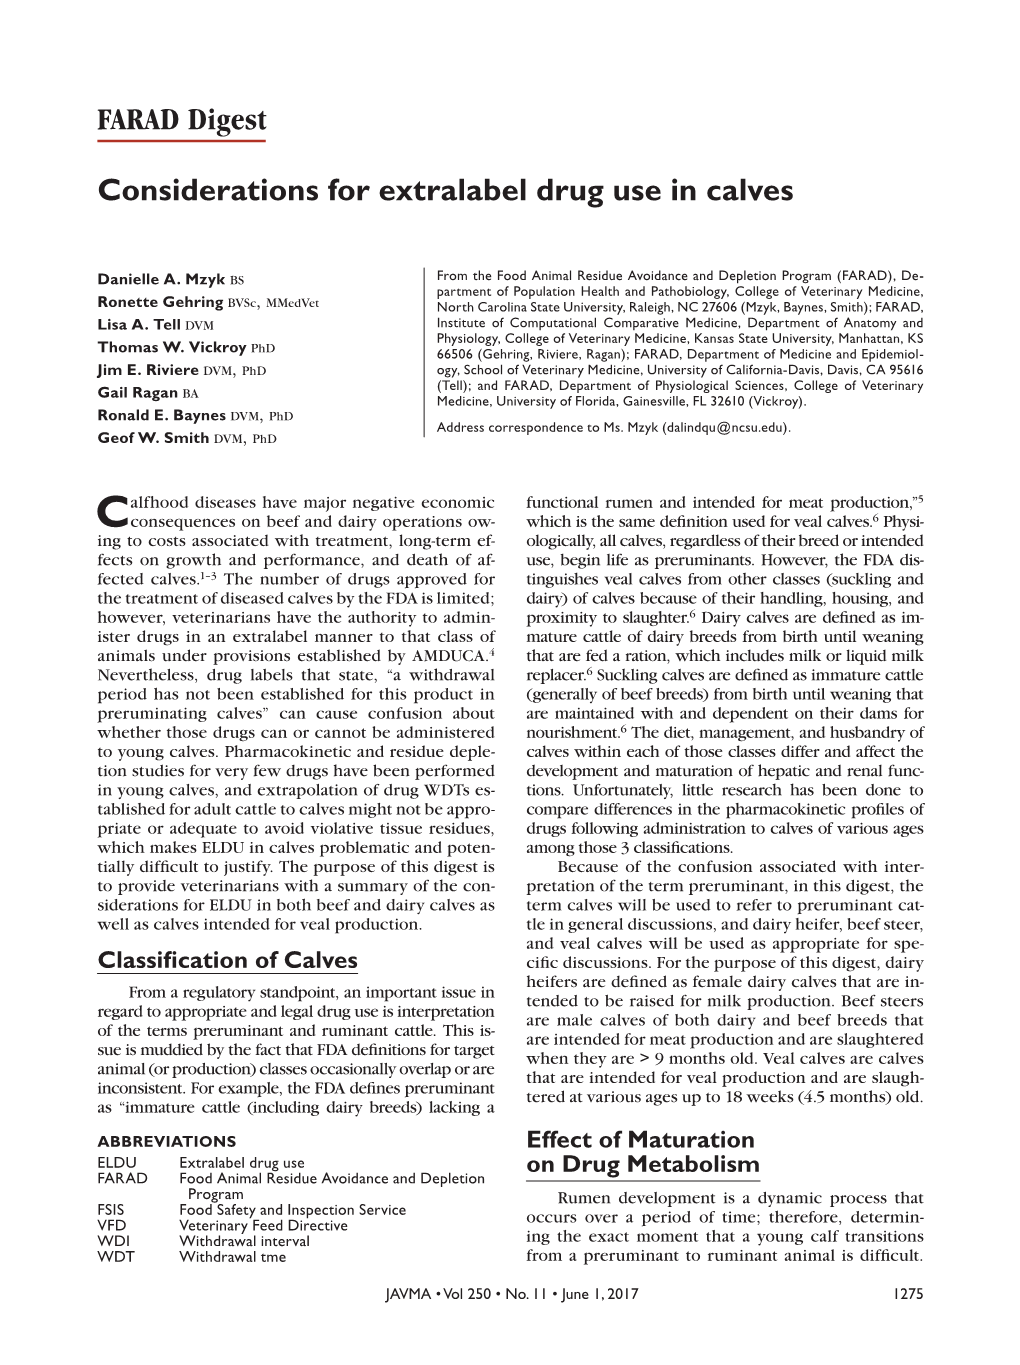 Considerations for Extralabel Drug Use in Calves